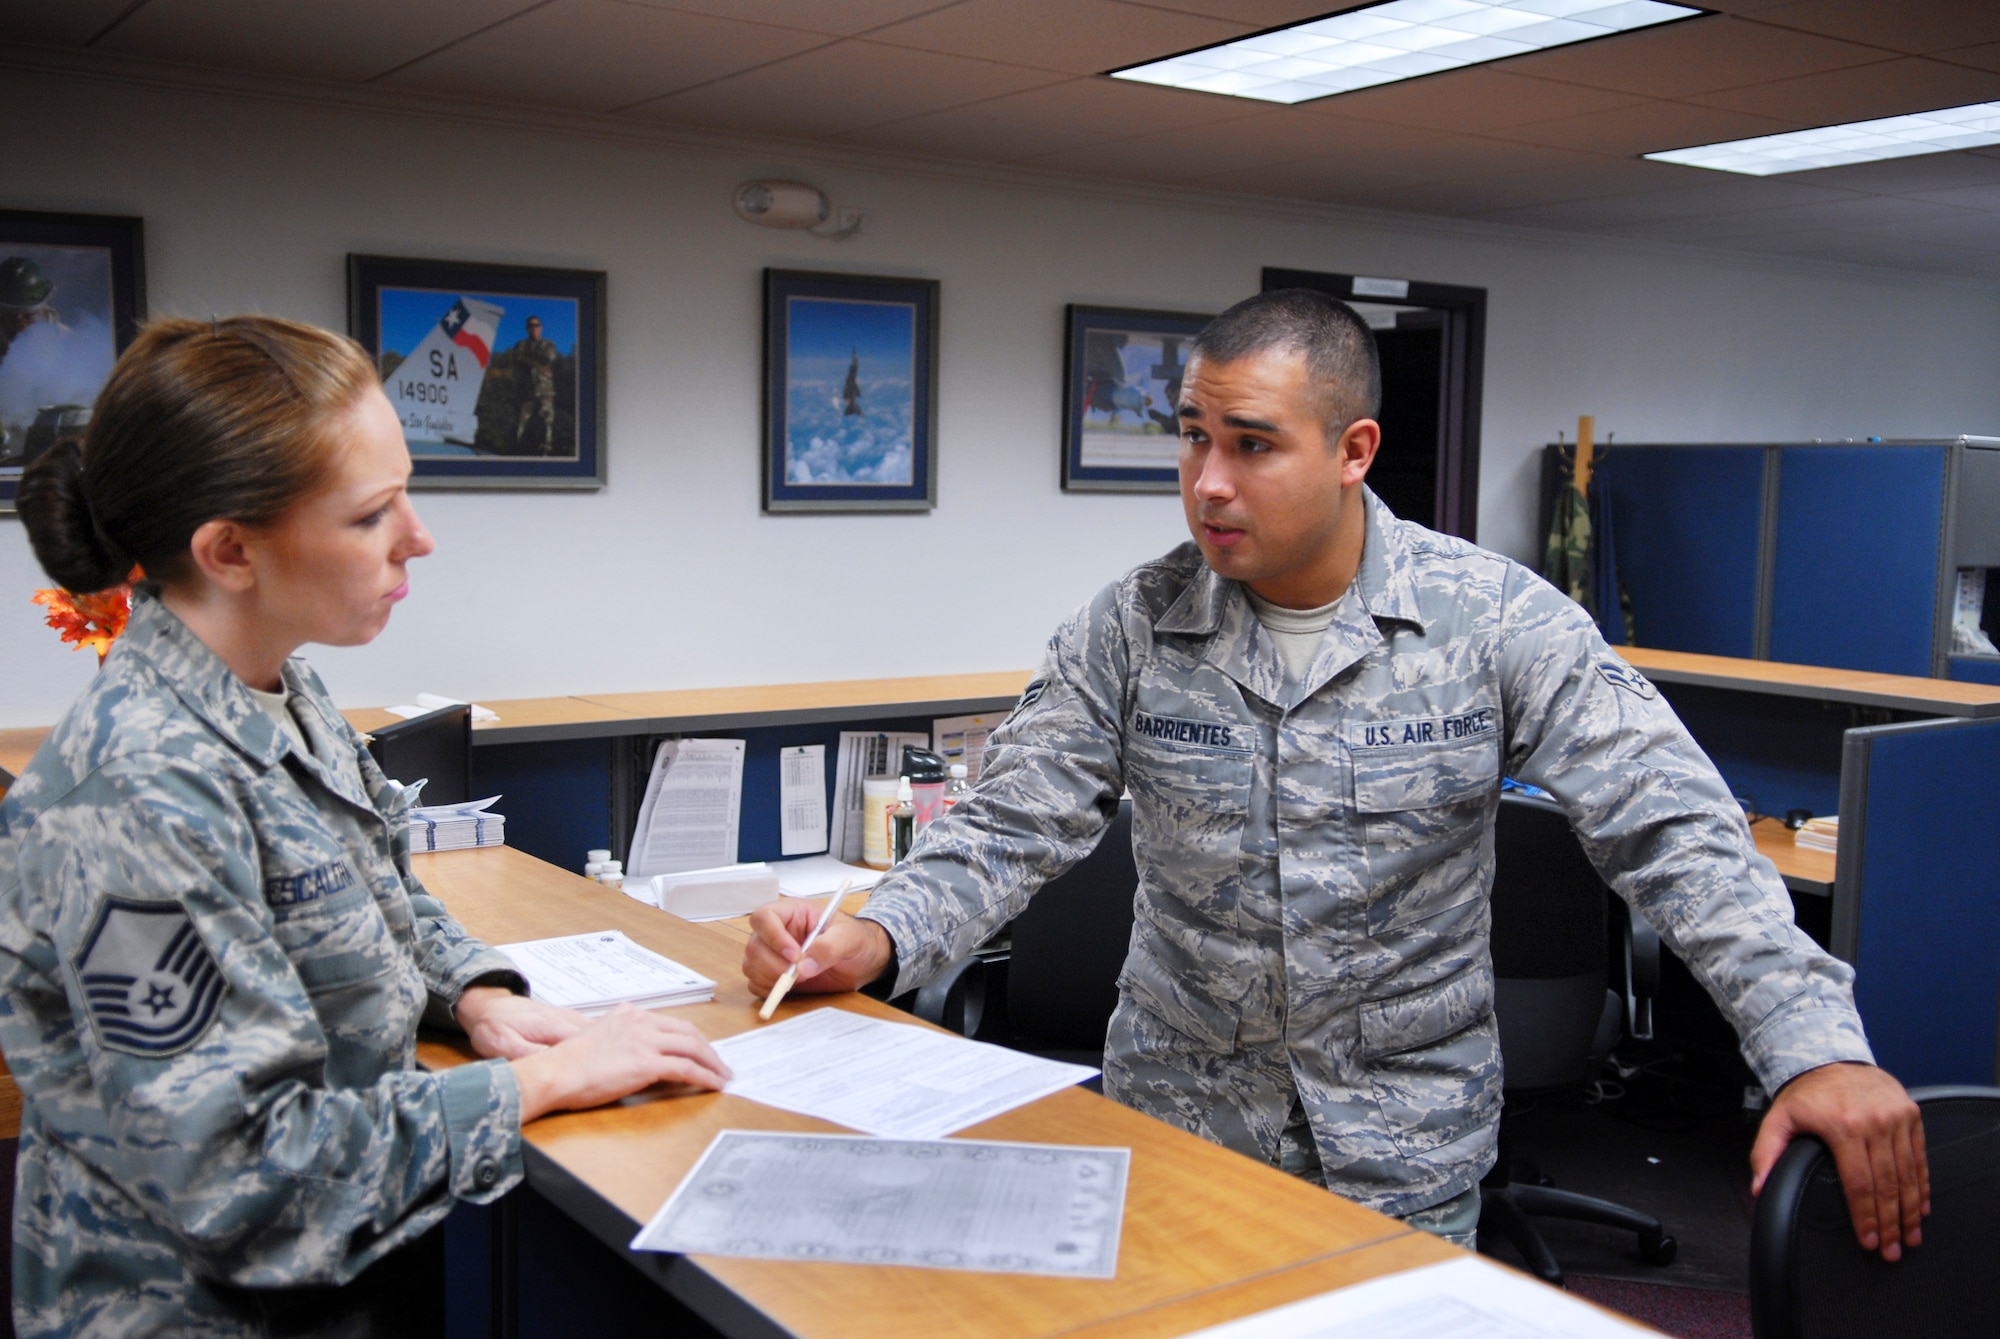 Airman 1st Class Kris Barrientes, a financial service technician with the Texas Air National Guard's 149th Fighter Wing, provides customer service to Master Sgt Carri Escalera, the noncommissioned officer in-charge of the Air National Guard installation's personnel readiness section, at Lackland Air Force Base, Texas, on September 3, 2009. (U.S. Air Force photo/Staff Sgt Eric L. Wilson)